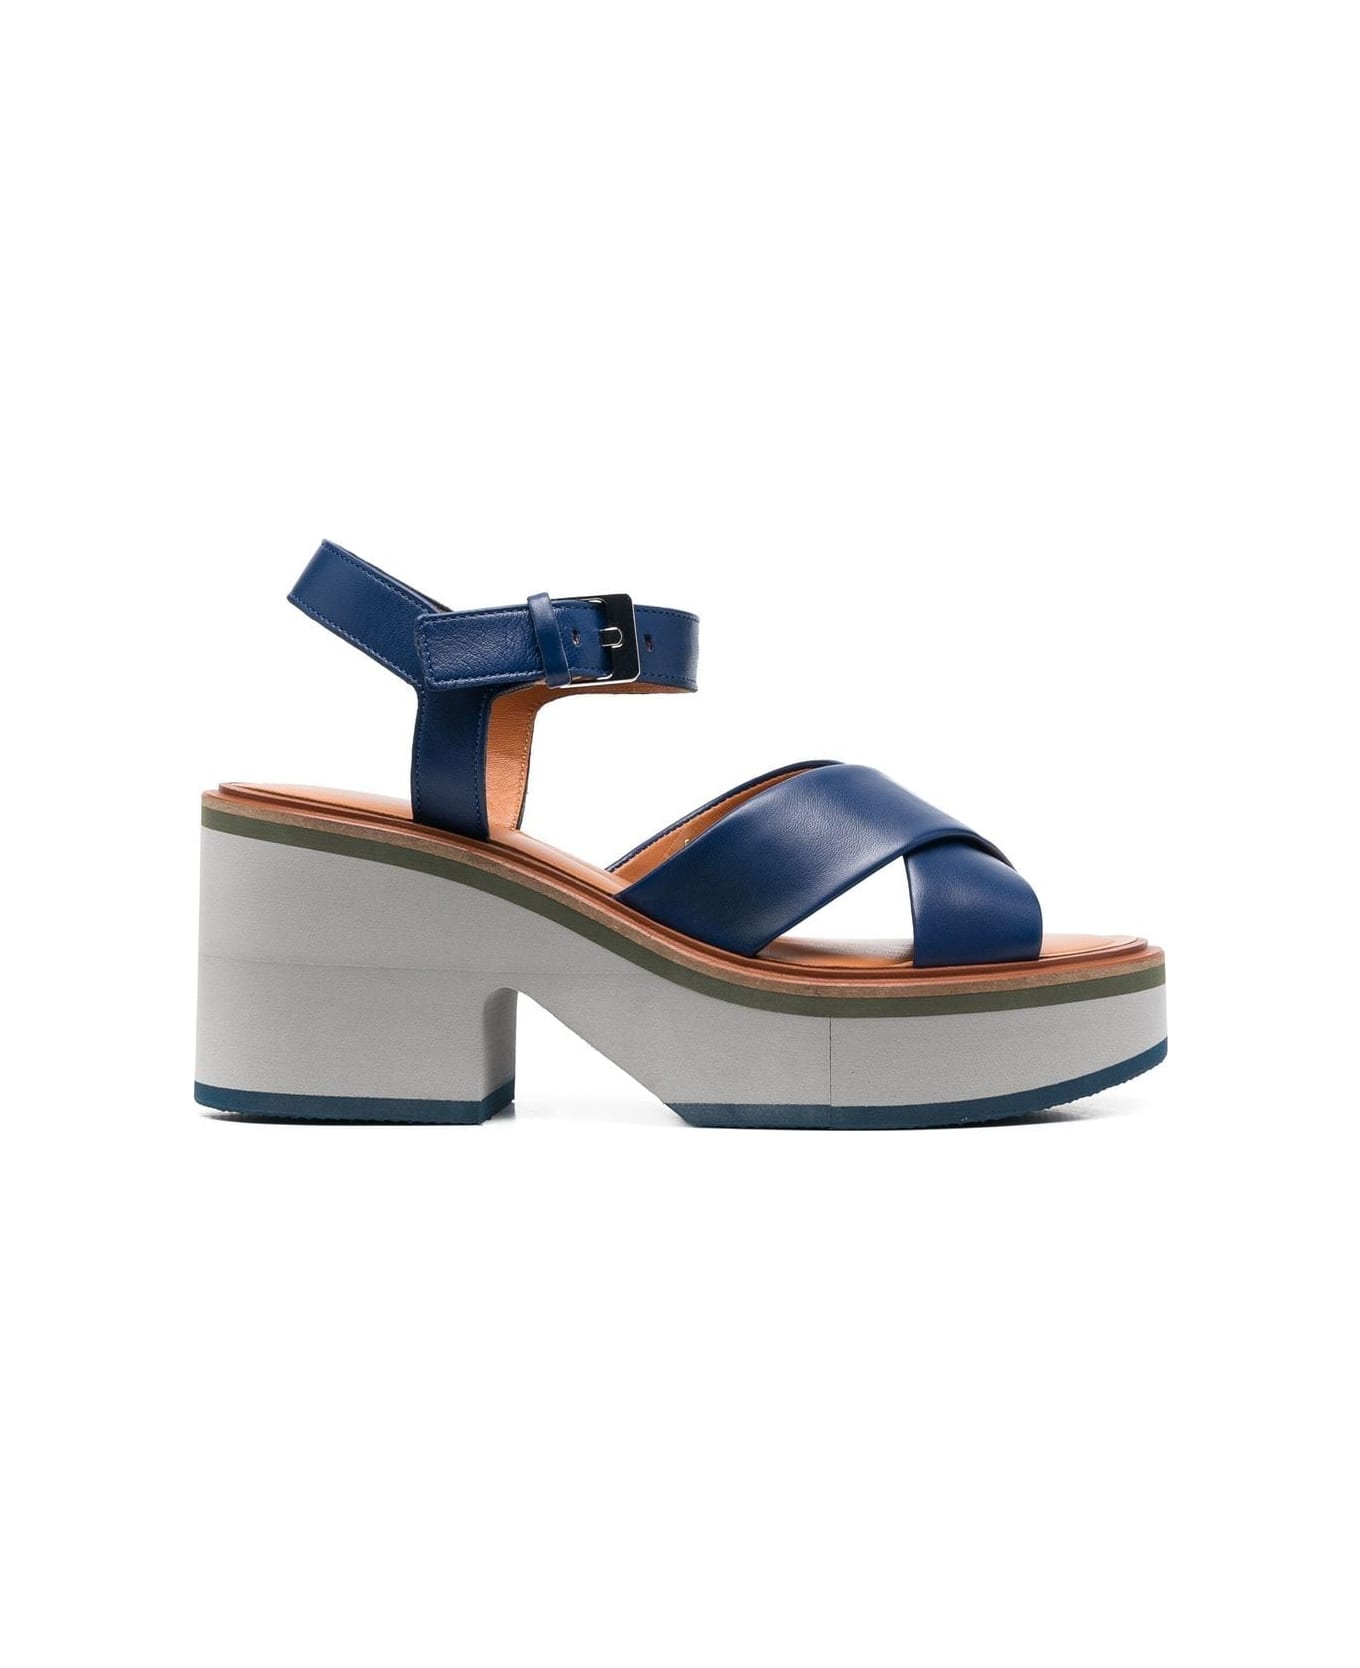 Clergerie Charline9 Criss Cross Sandal With Closure At The Ankles - Navy Nap